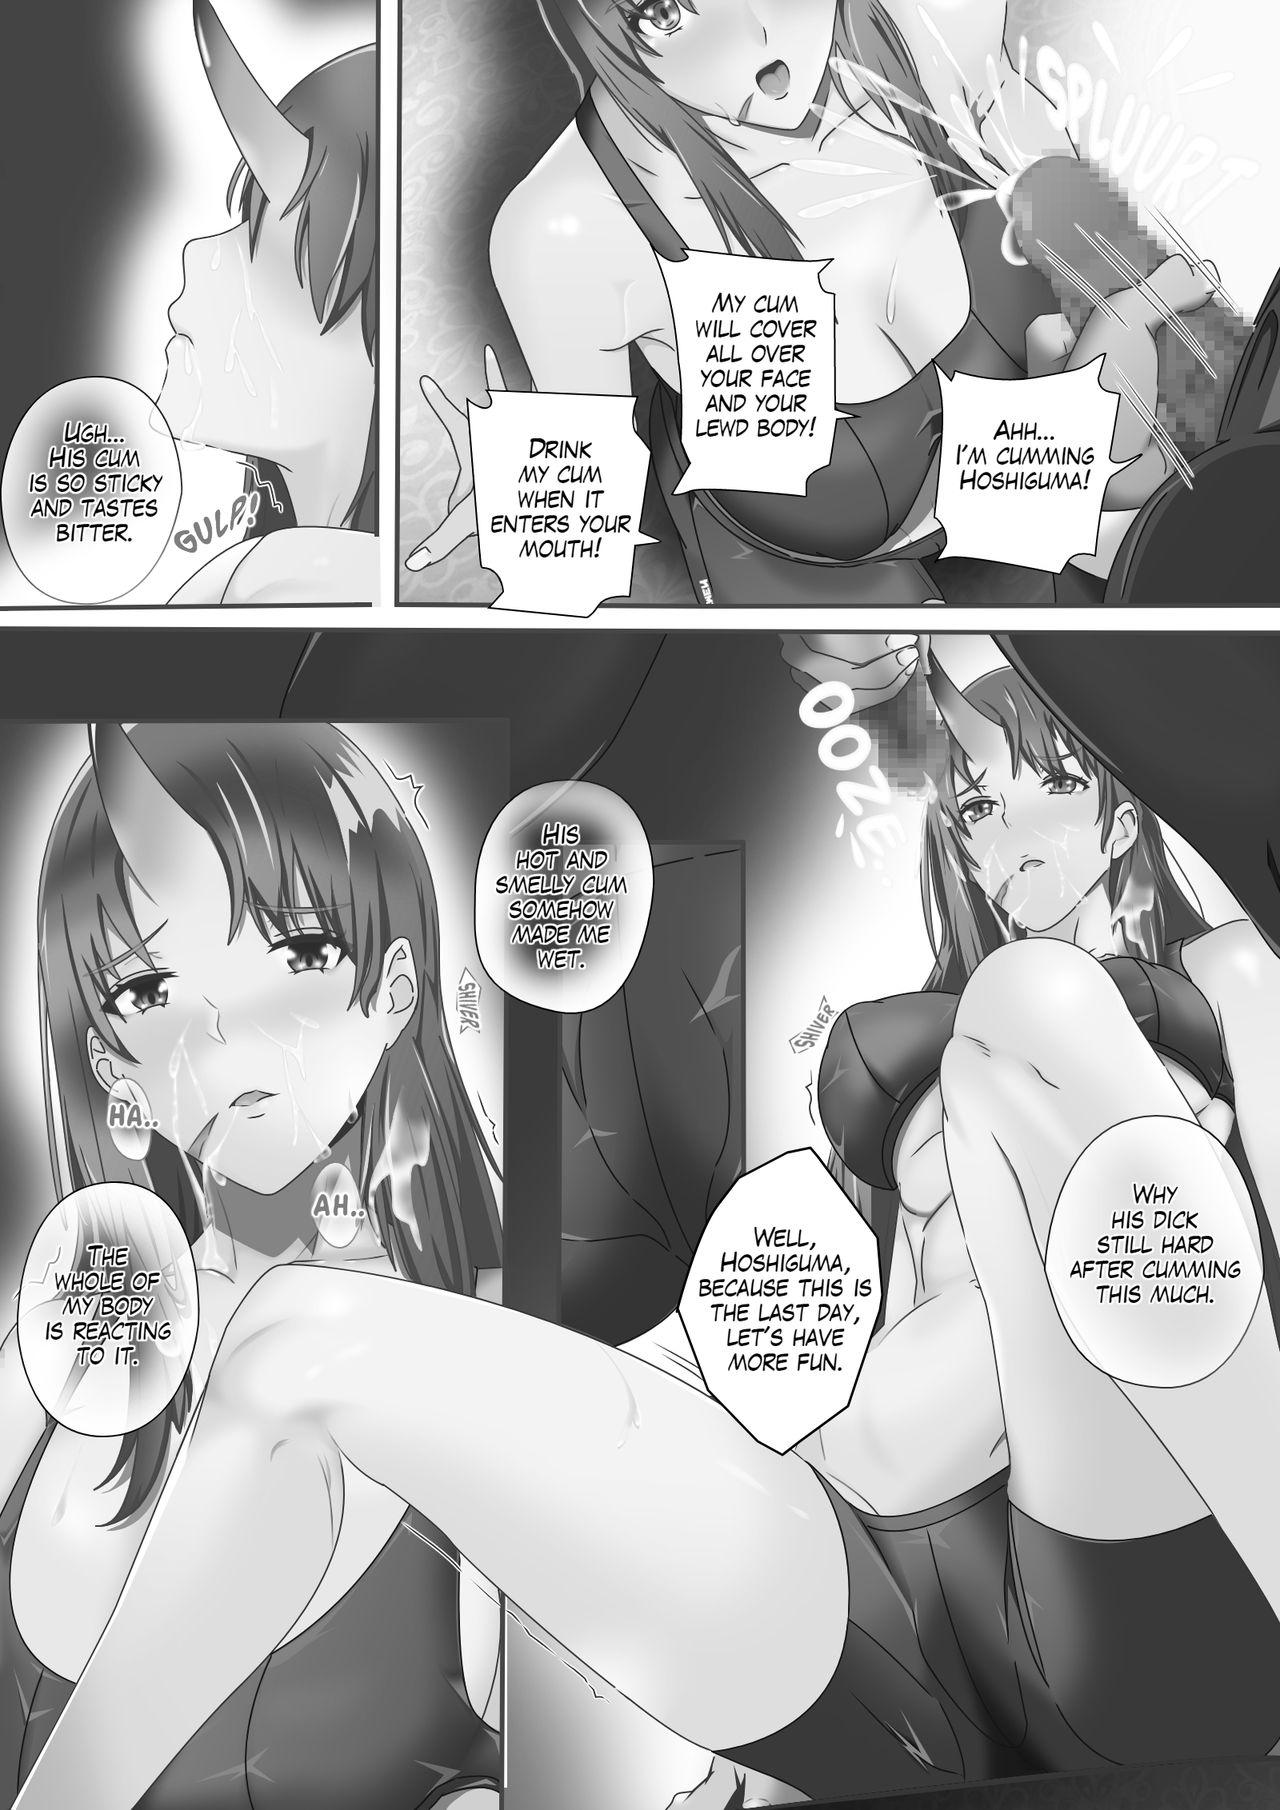 Missionary Porn Hoshiguma's Secret Contract - Arknights Pick Up - Page 6